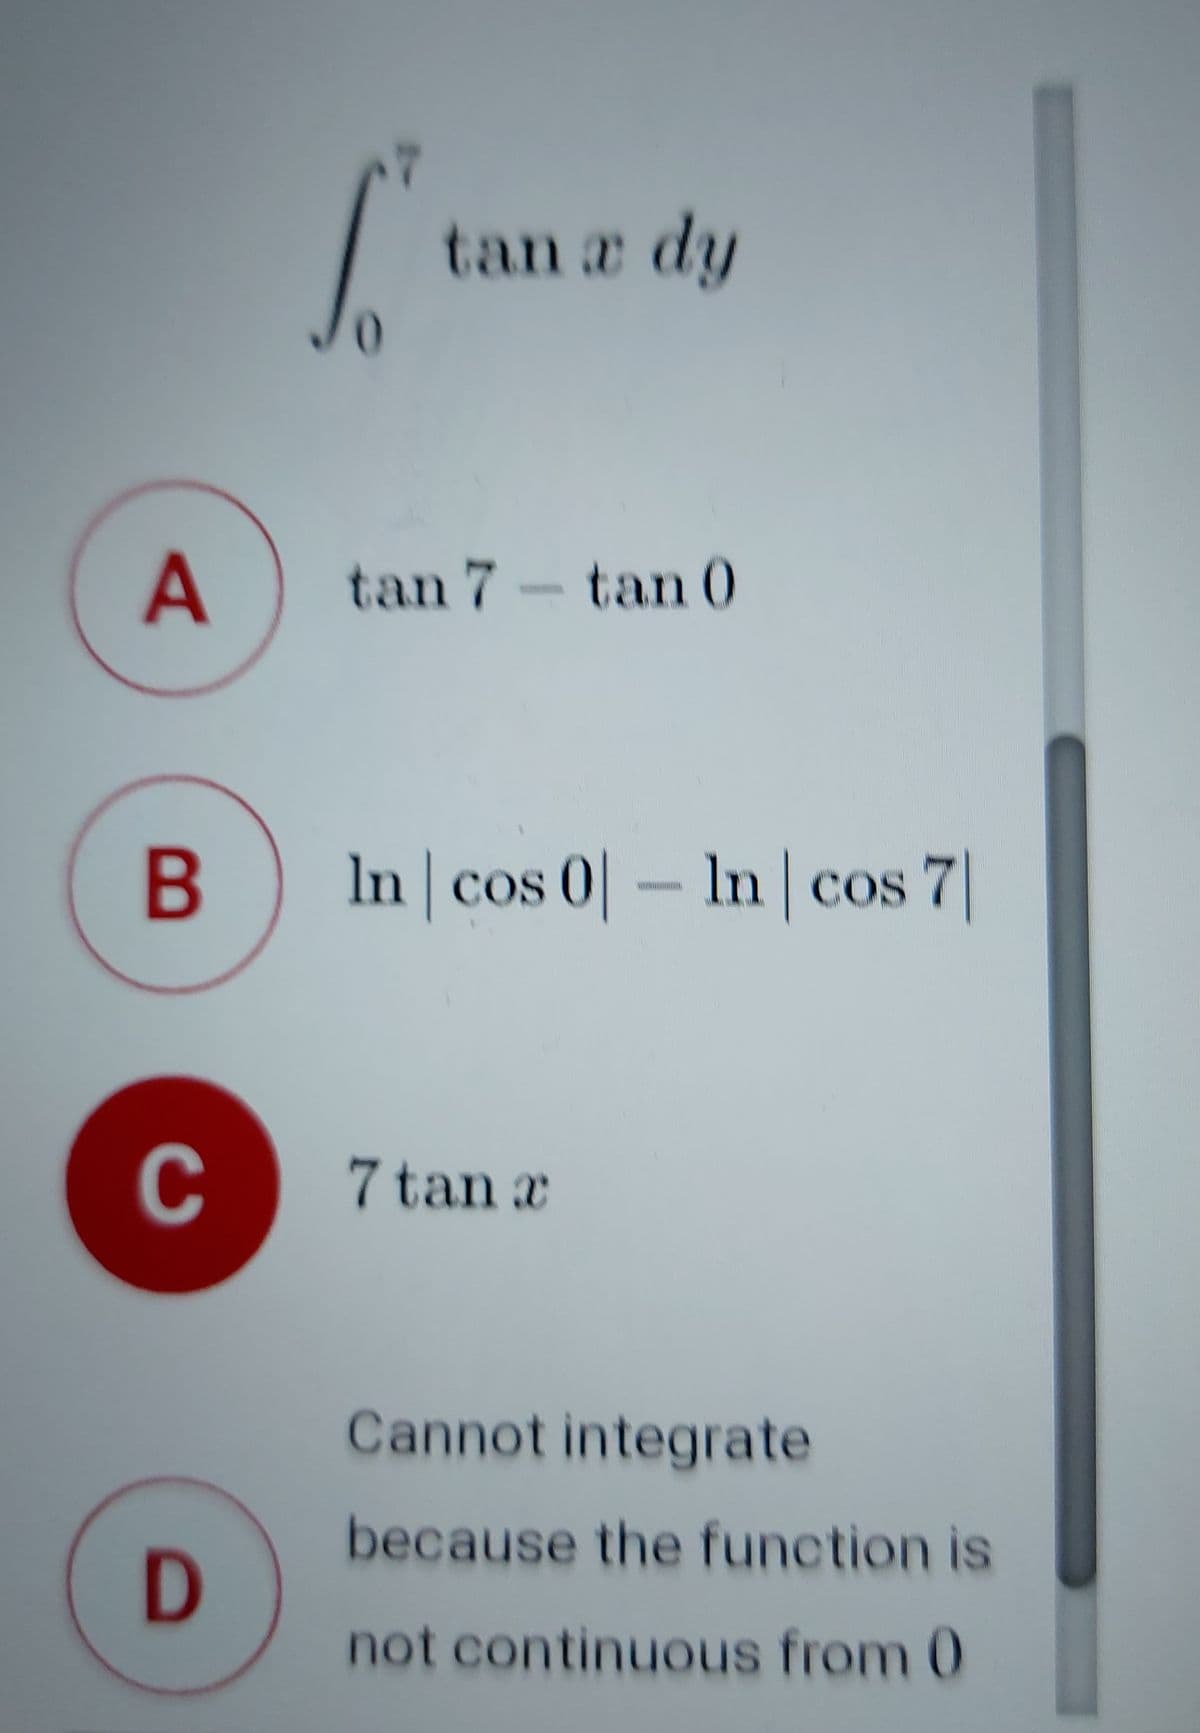 tan a dy
tan 7- tan 0
B
ln cos 0-In cos 7
C
7 tan c
Cannot integrate
because the function is
not continuous from 0
